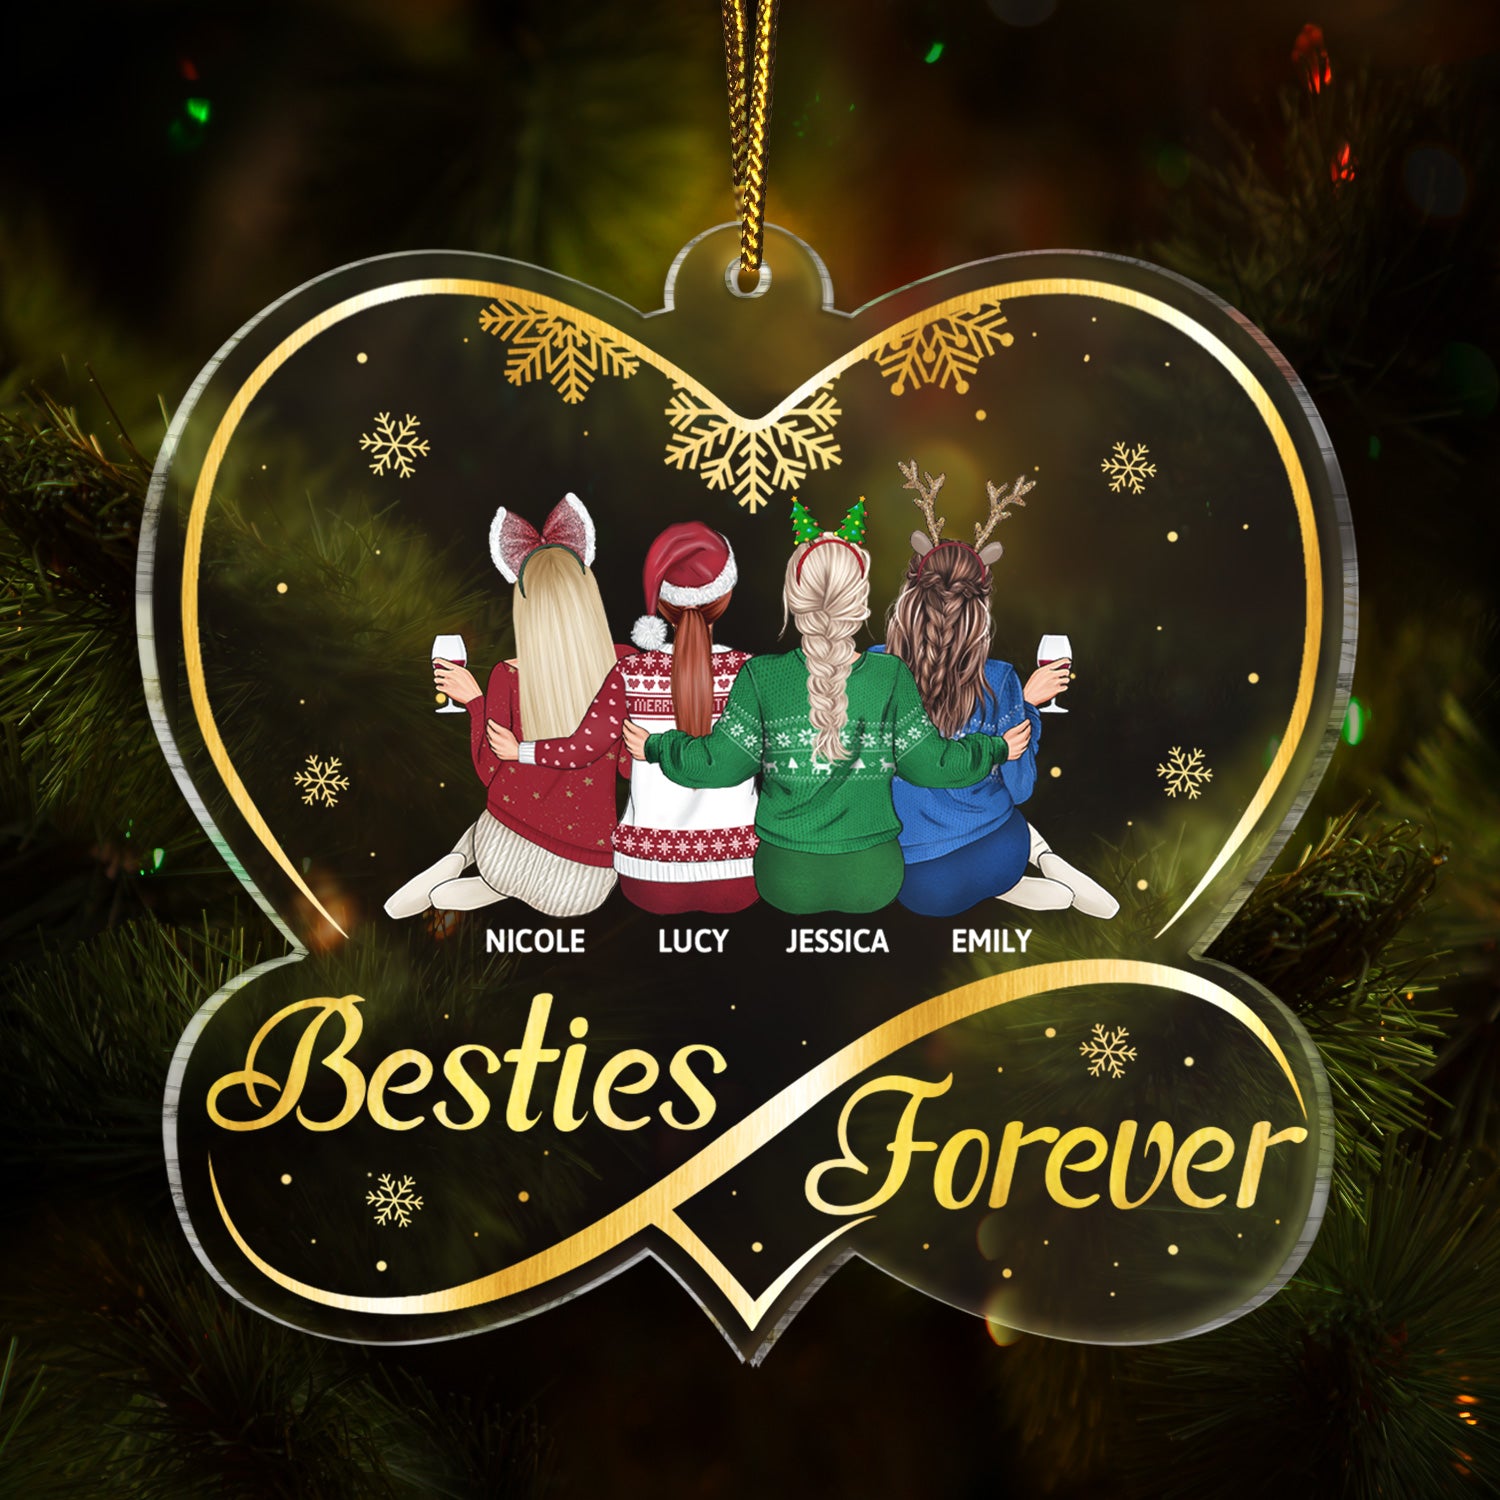 Besties Forever - Christmas Gifts For Best Friends, Sisters - Personalized Custom Shaped Acrylic Ornament